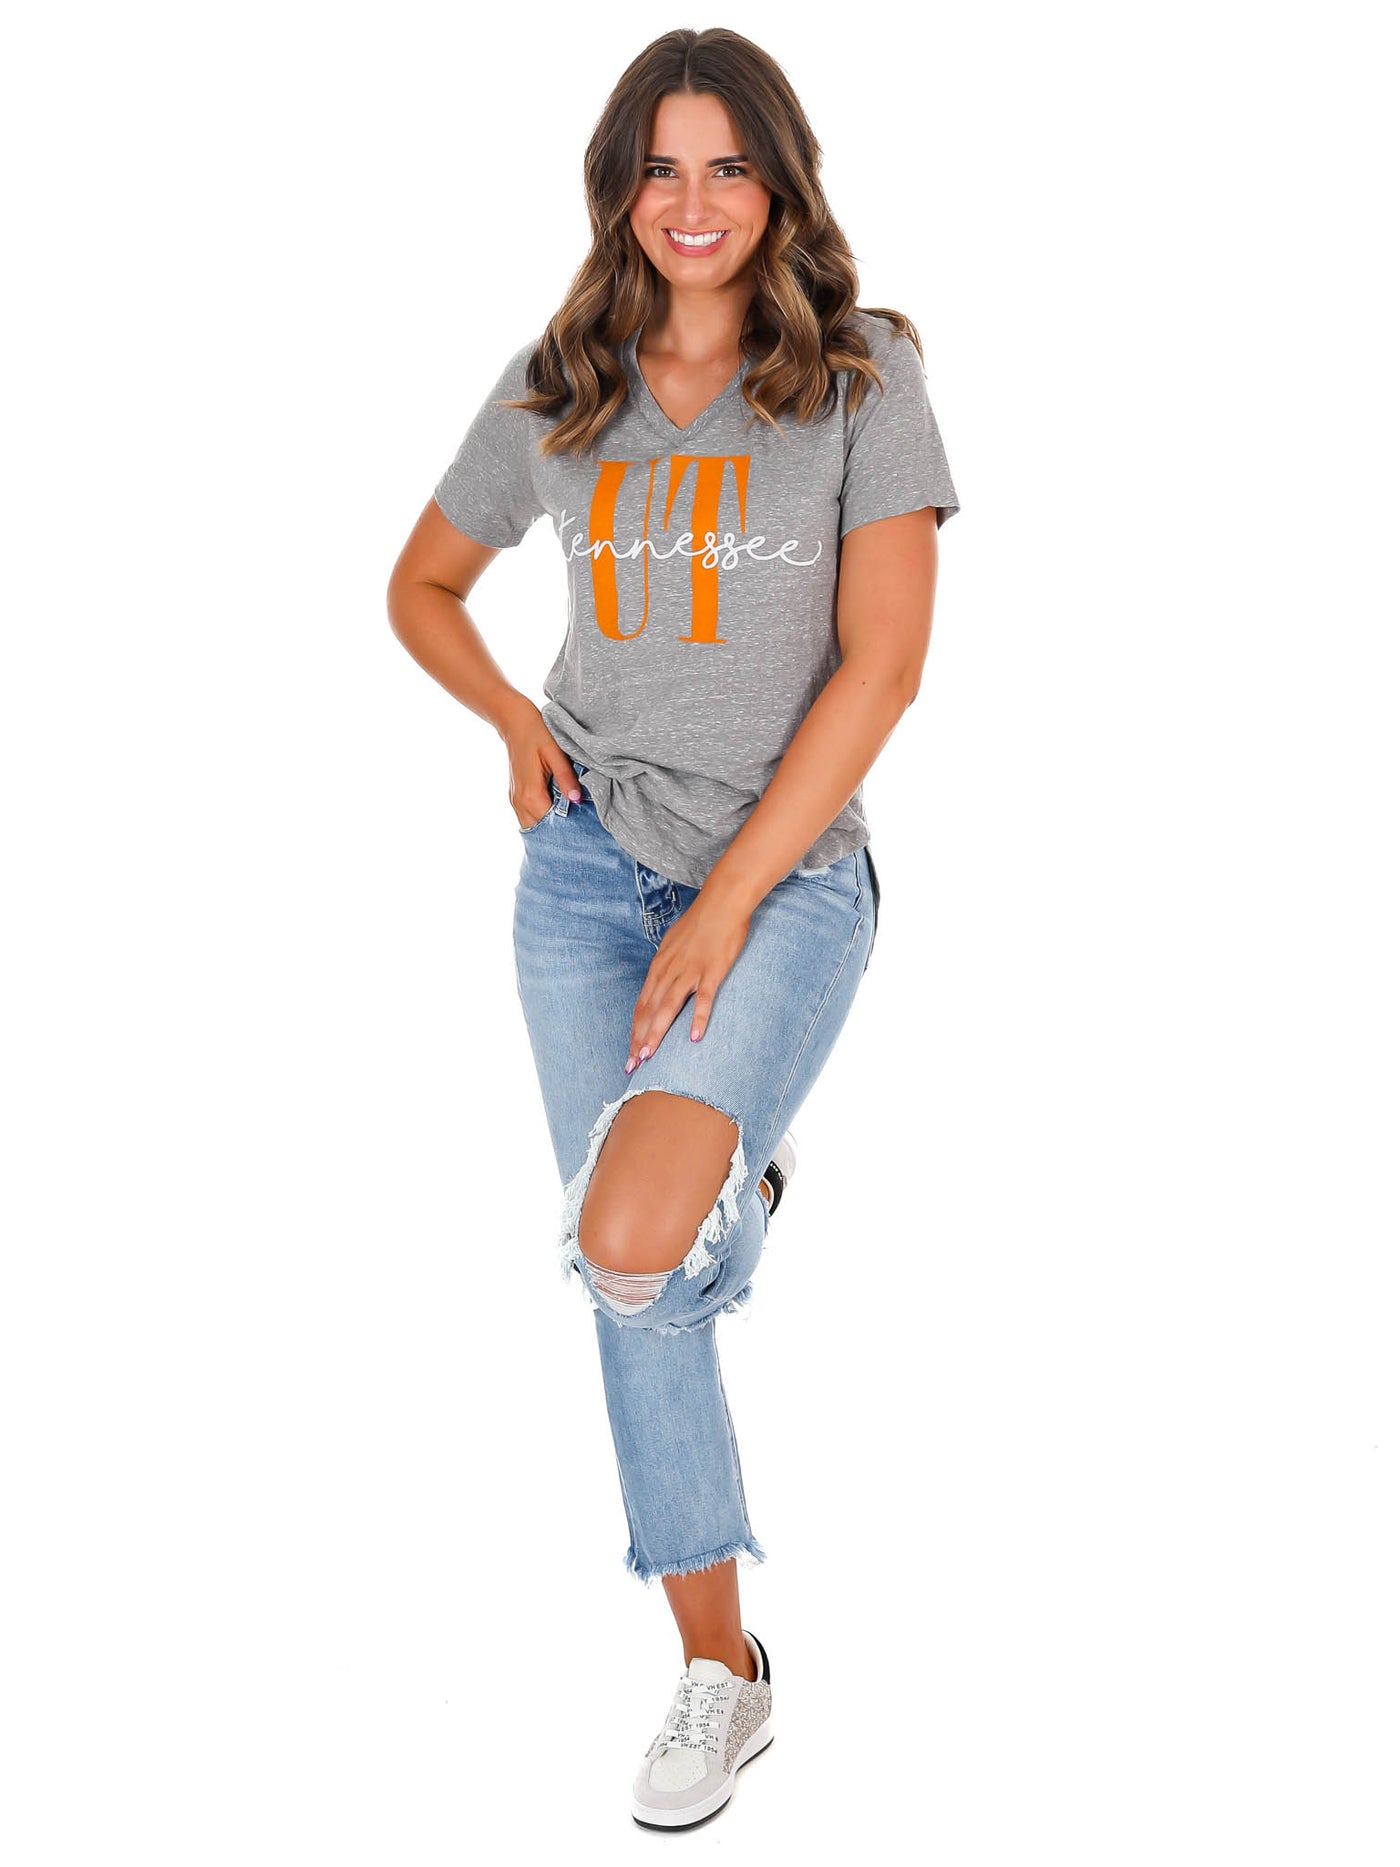 Tennessee Coral Rounded Bottom Top